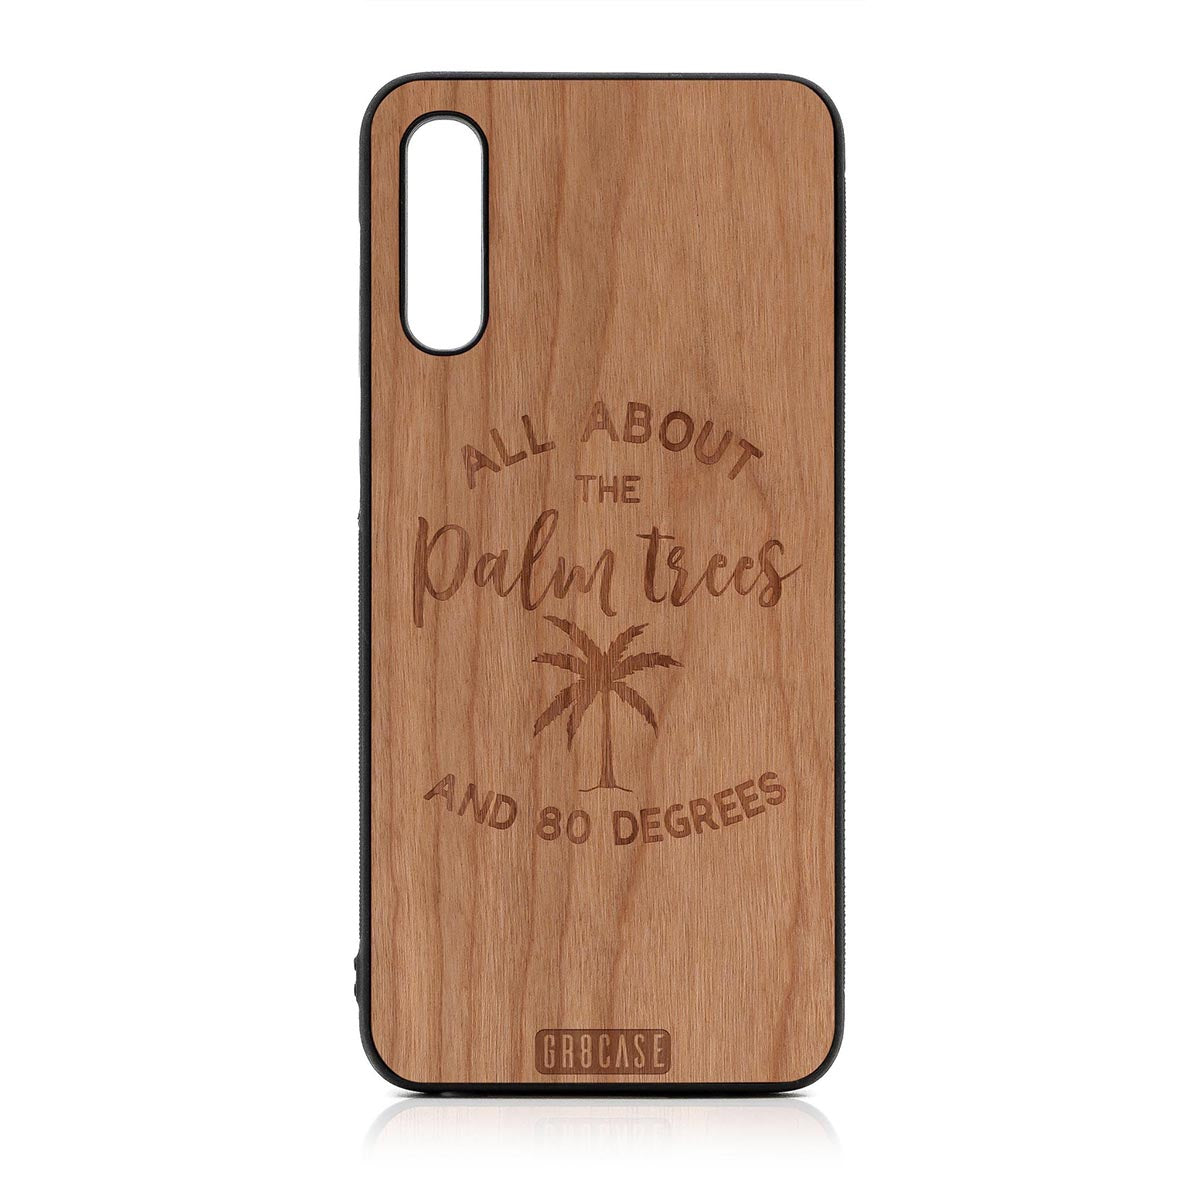 All About The Palm Trees And 80 Degrees Design Wood Case For Samsung Galaxy A50 by GR8CASE